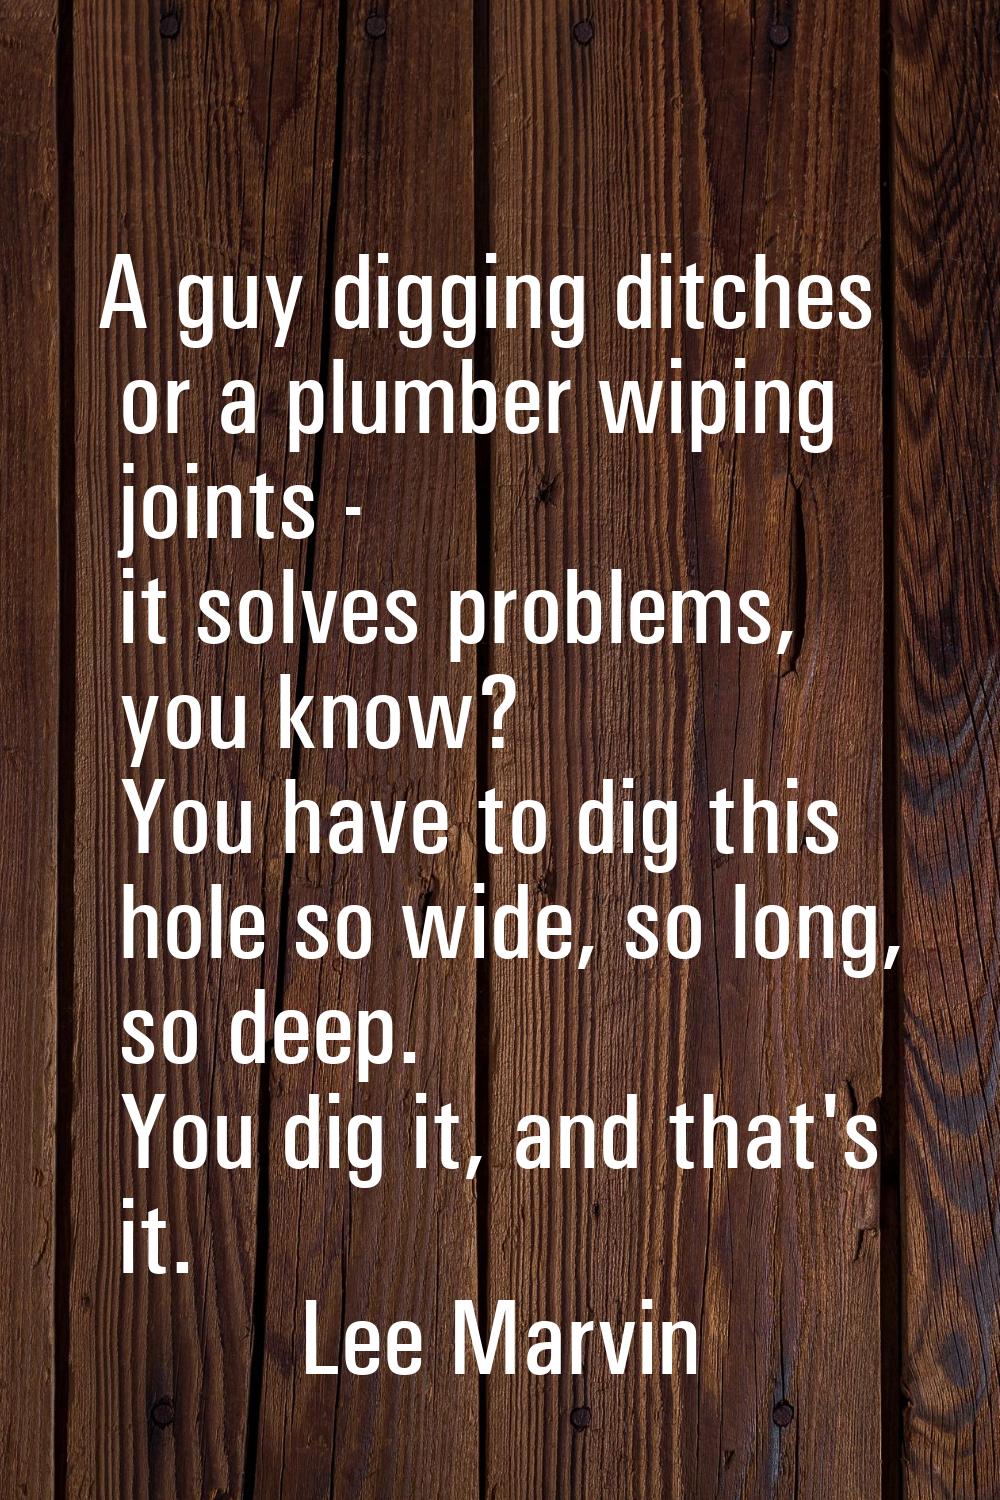 A guy digging ditches or a plumber wiping joints - it solves problems, you know? You have to dig th